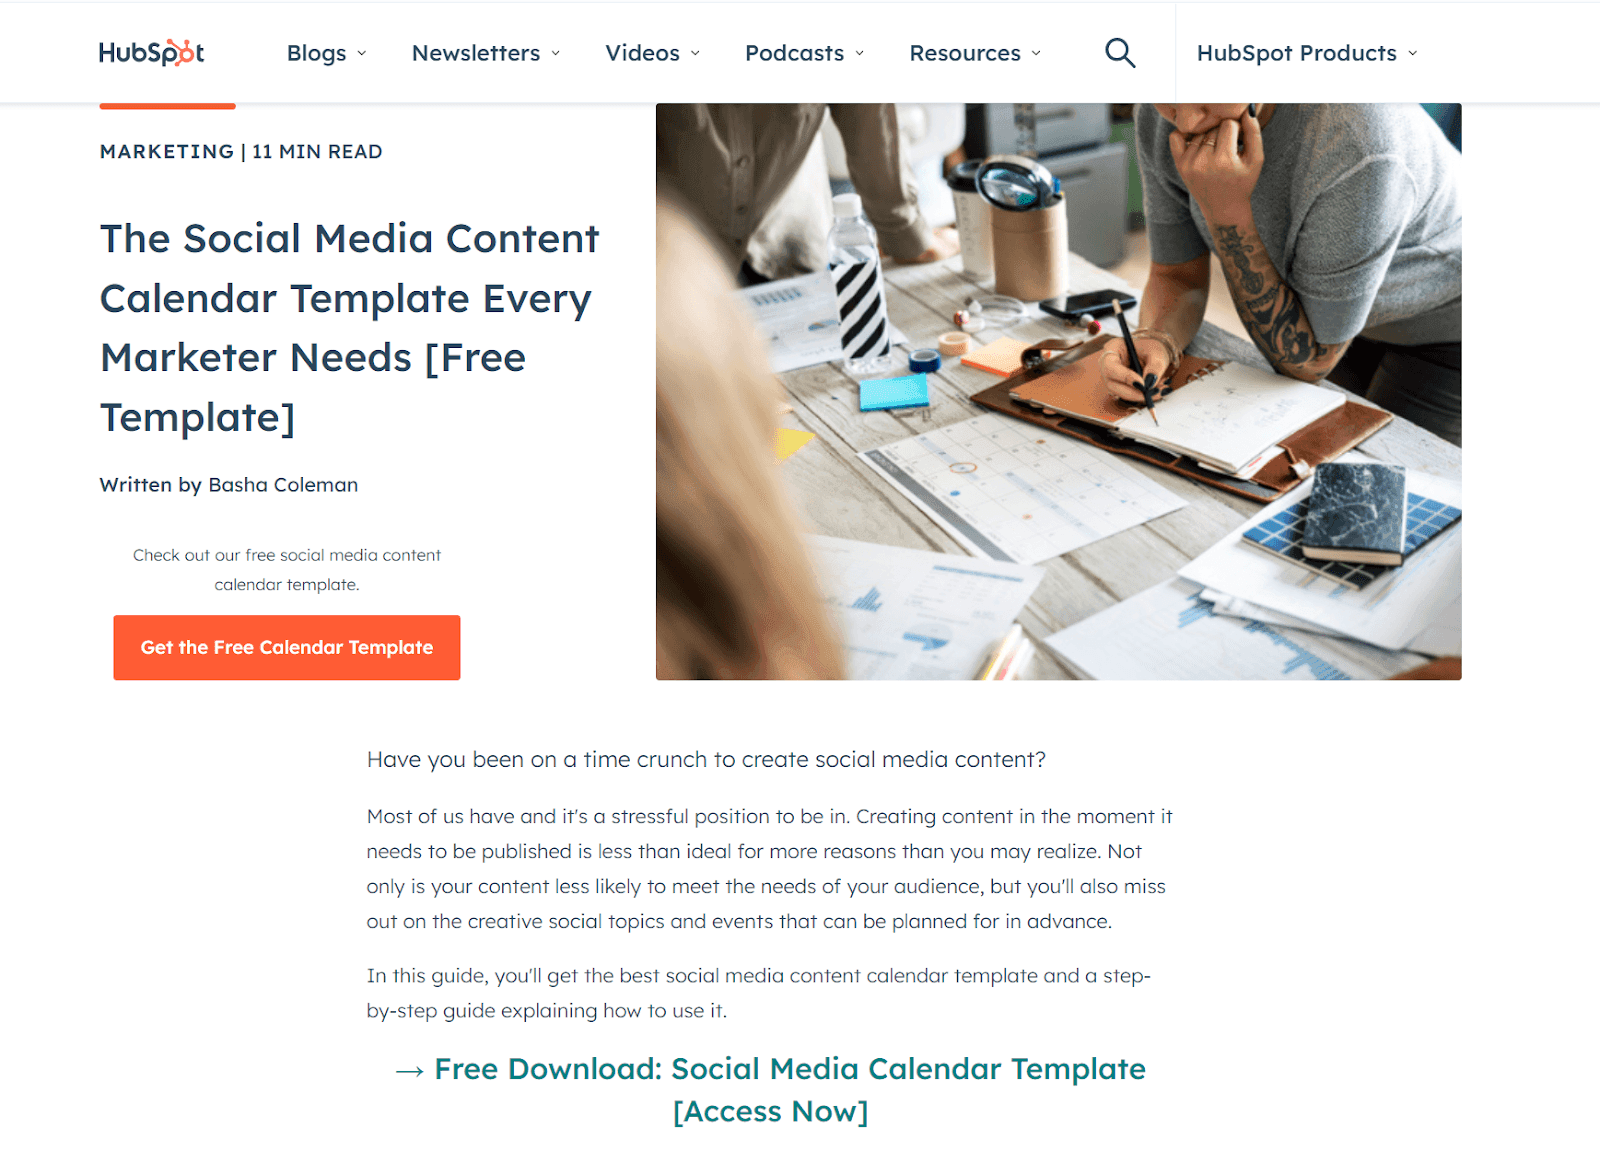 Hubspot marketing strategy and content guides